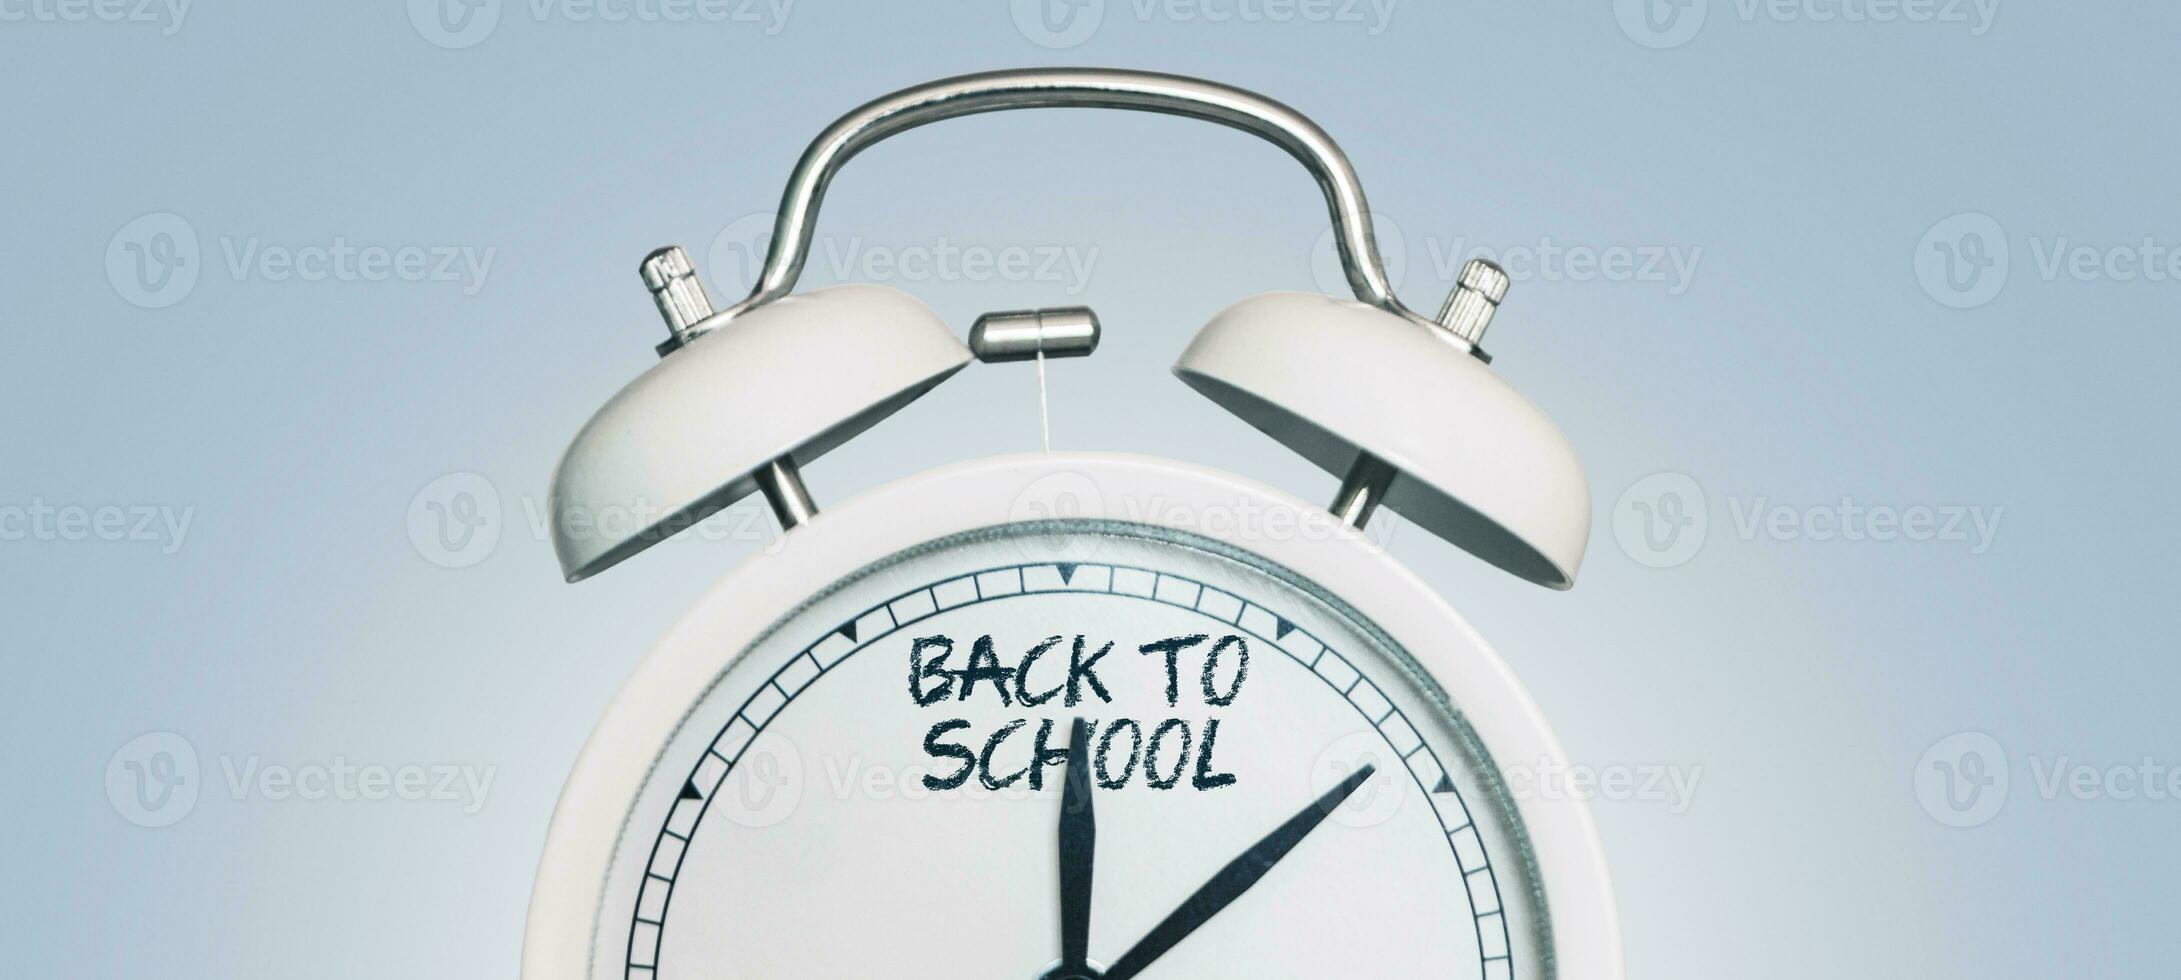 Vintage alarm clock showing back to school arrows. Beginning of the school season. Education. Students start. School and clock, concept photo